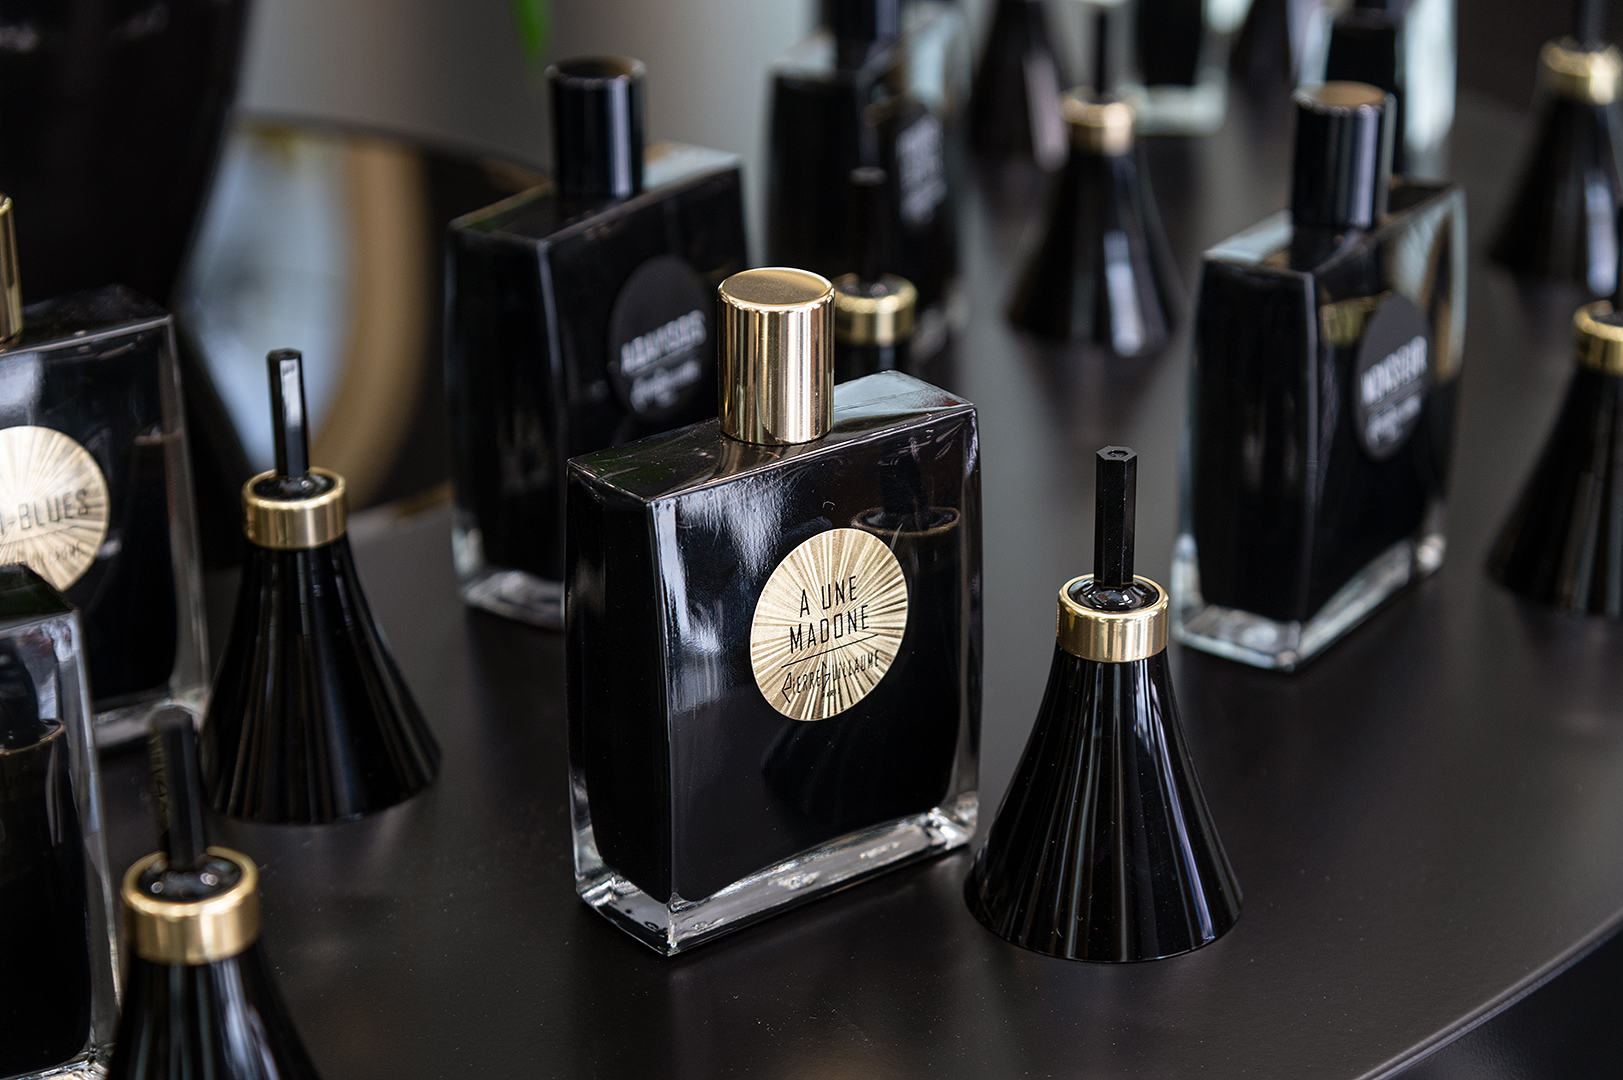 A SPECIAL EXPERIENCE FOR FRAGRANCE LOVERS